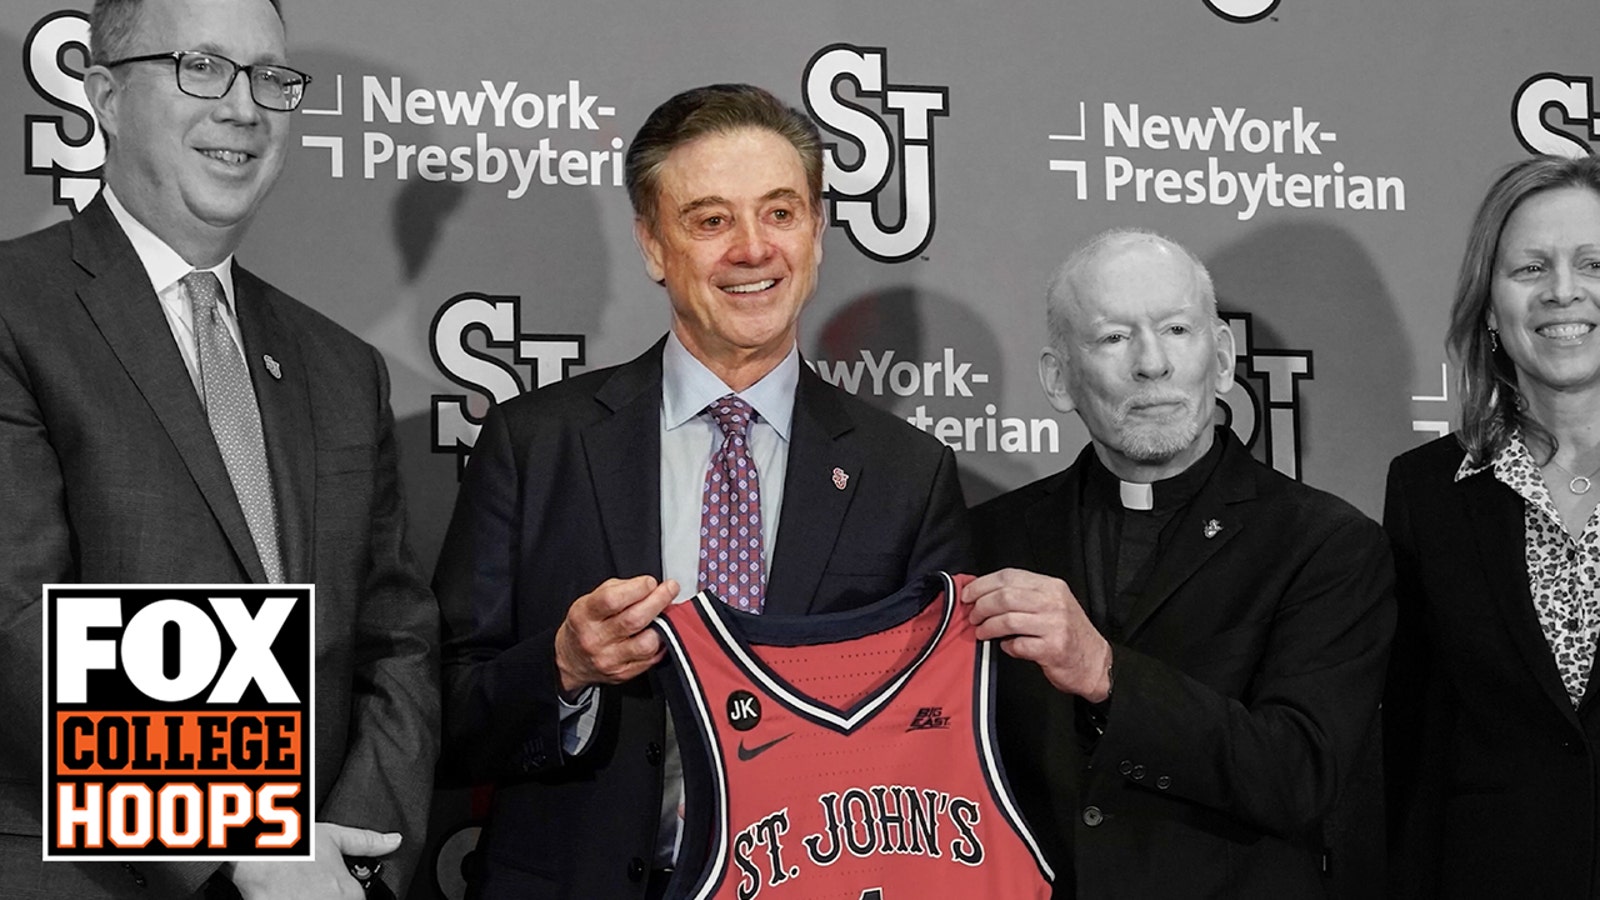 Pitino Chronicles Ep. 3: On the magnitude of NYC hoops